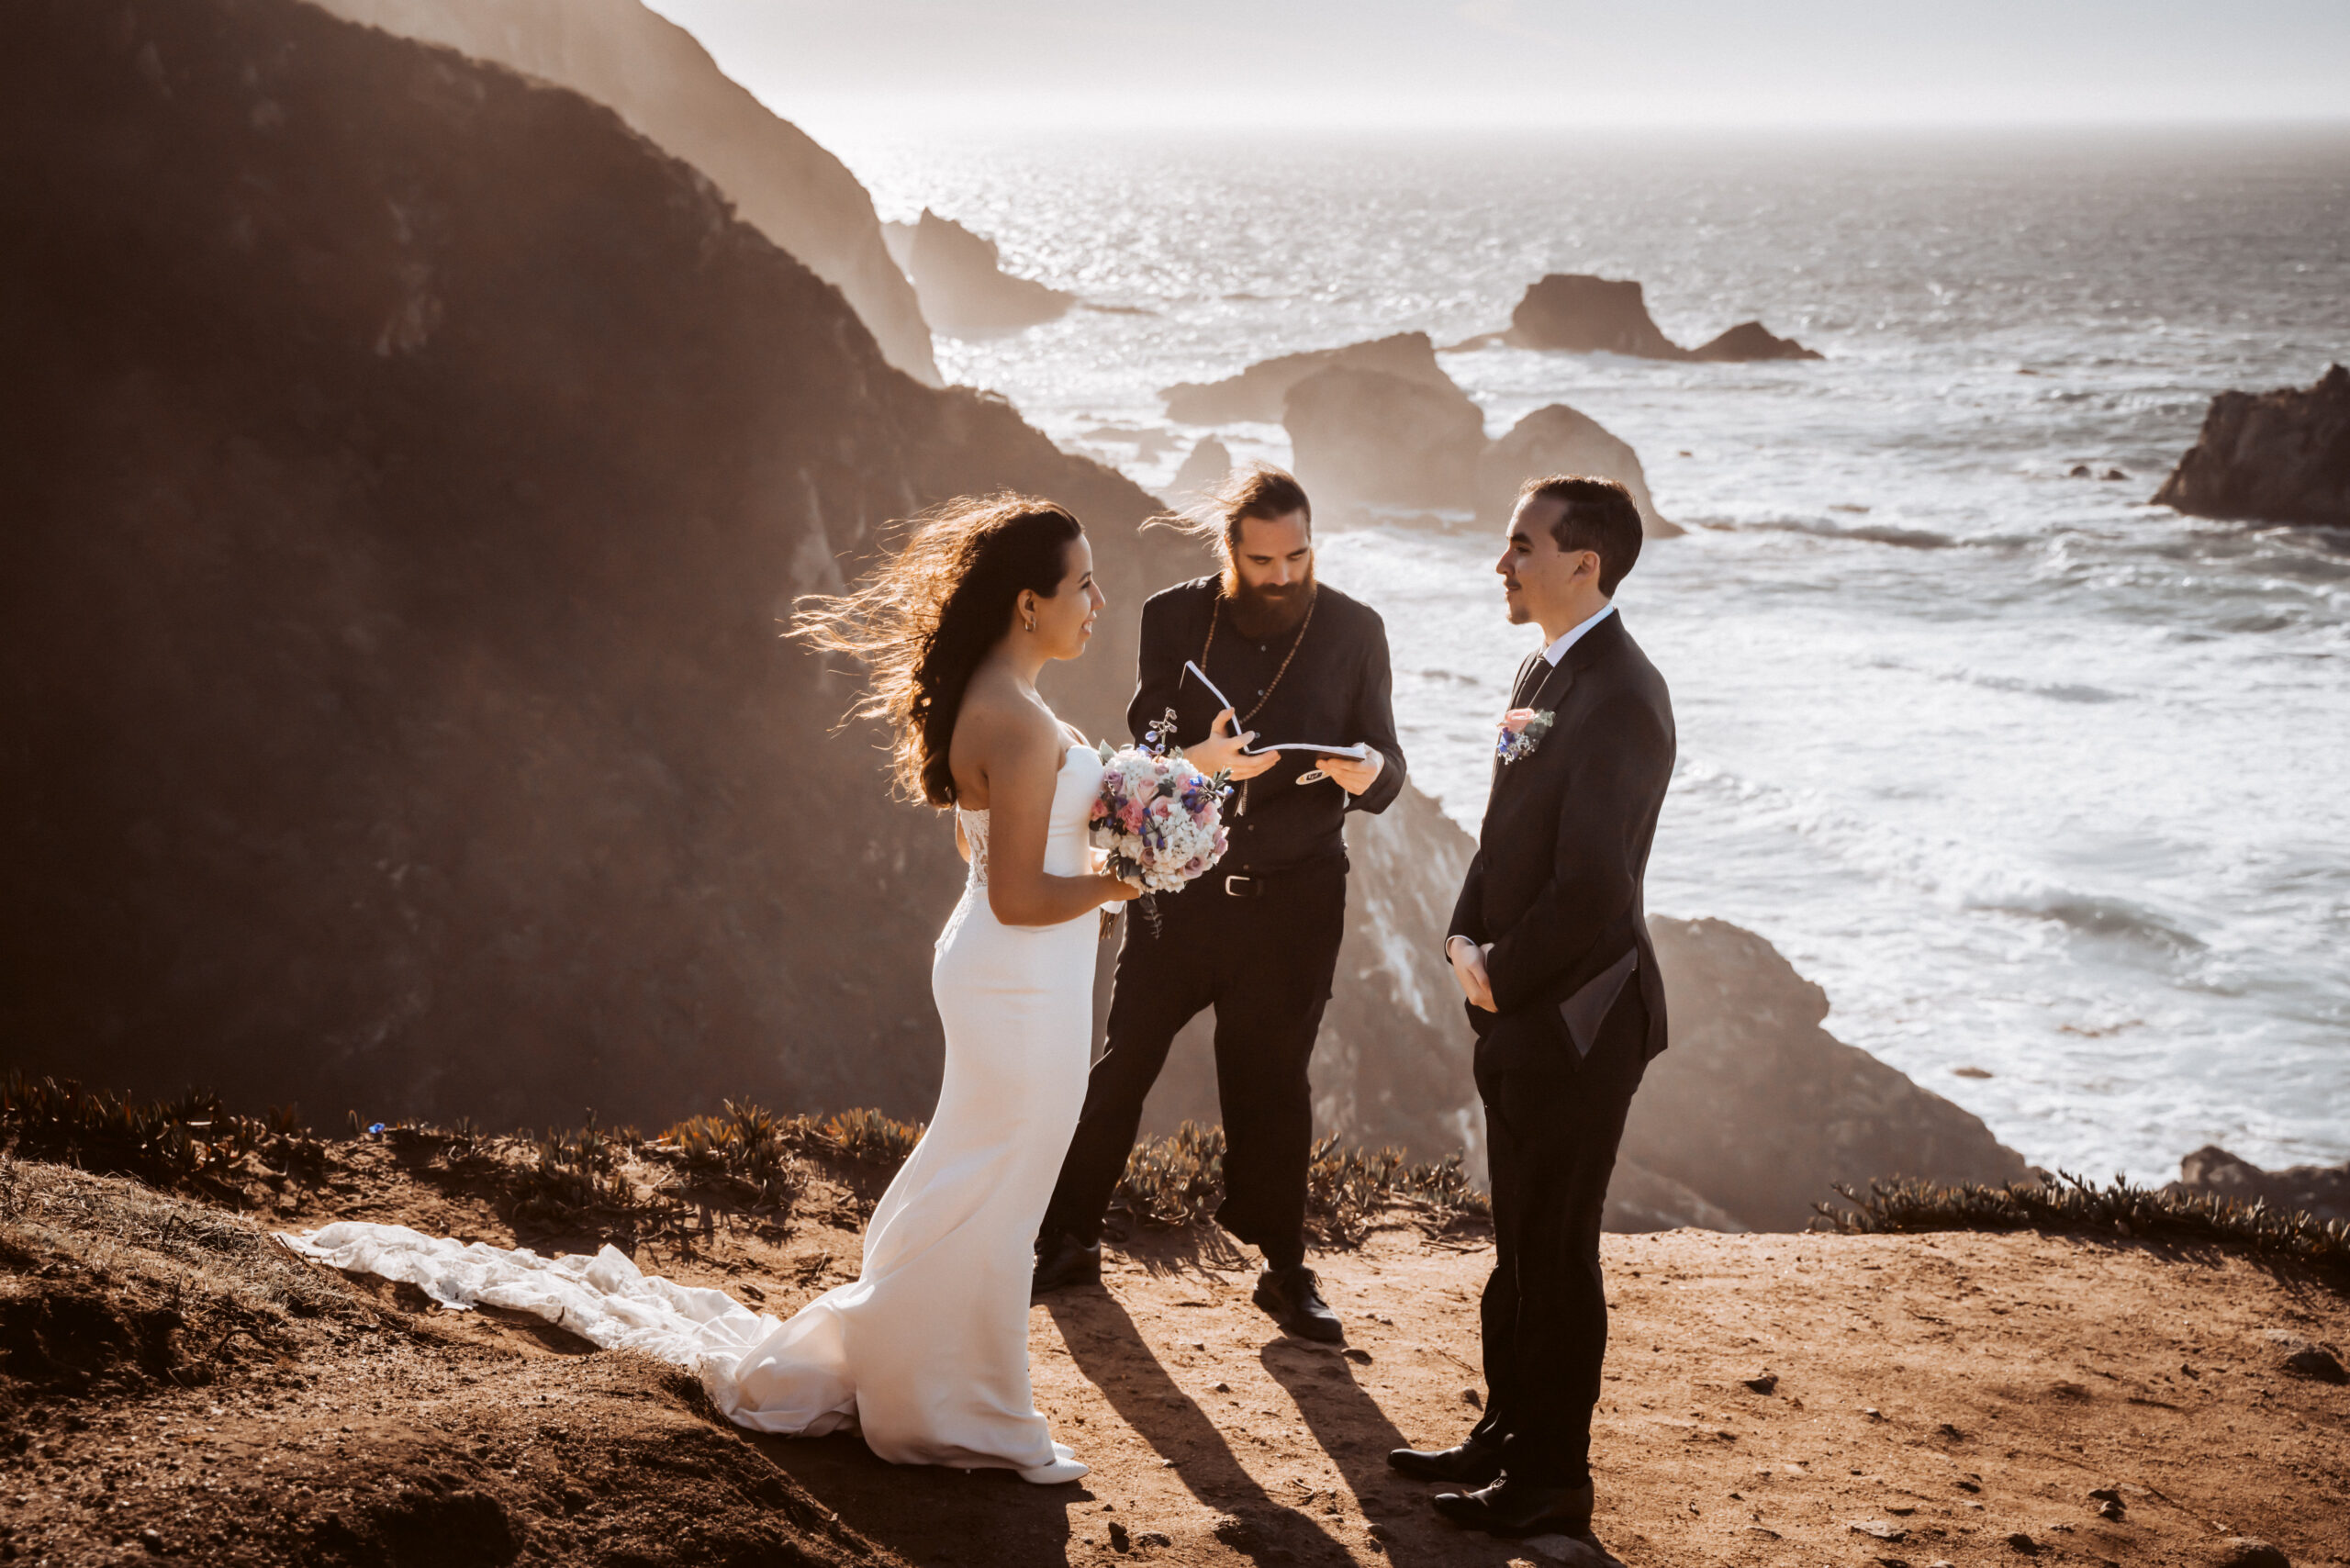 a couple doing a wedding ceremony overlooking the cliffs of Big Sur in California